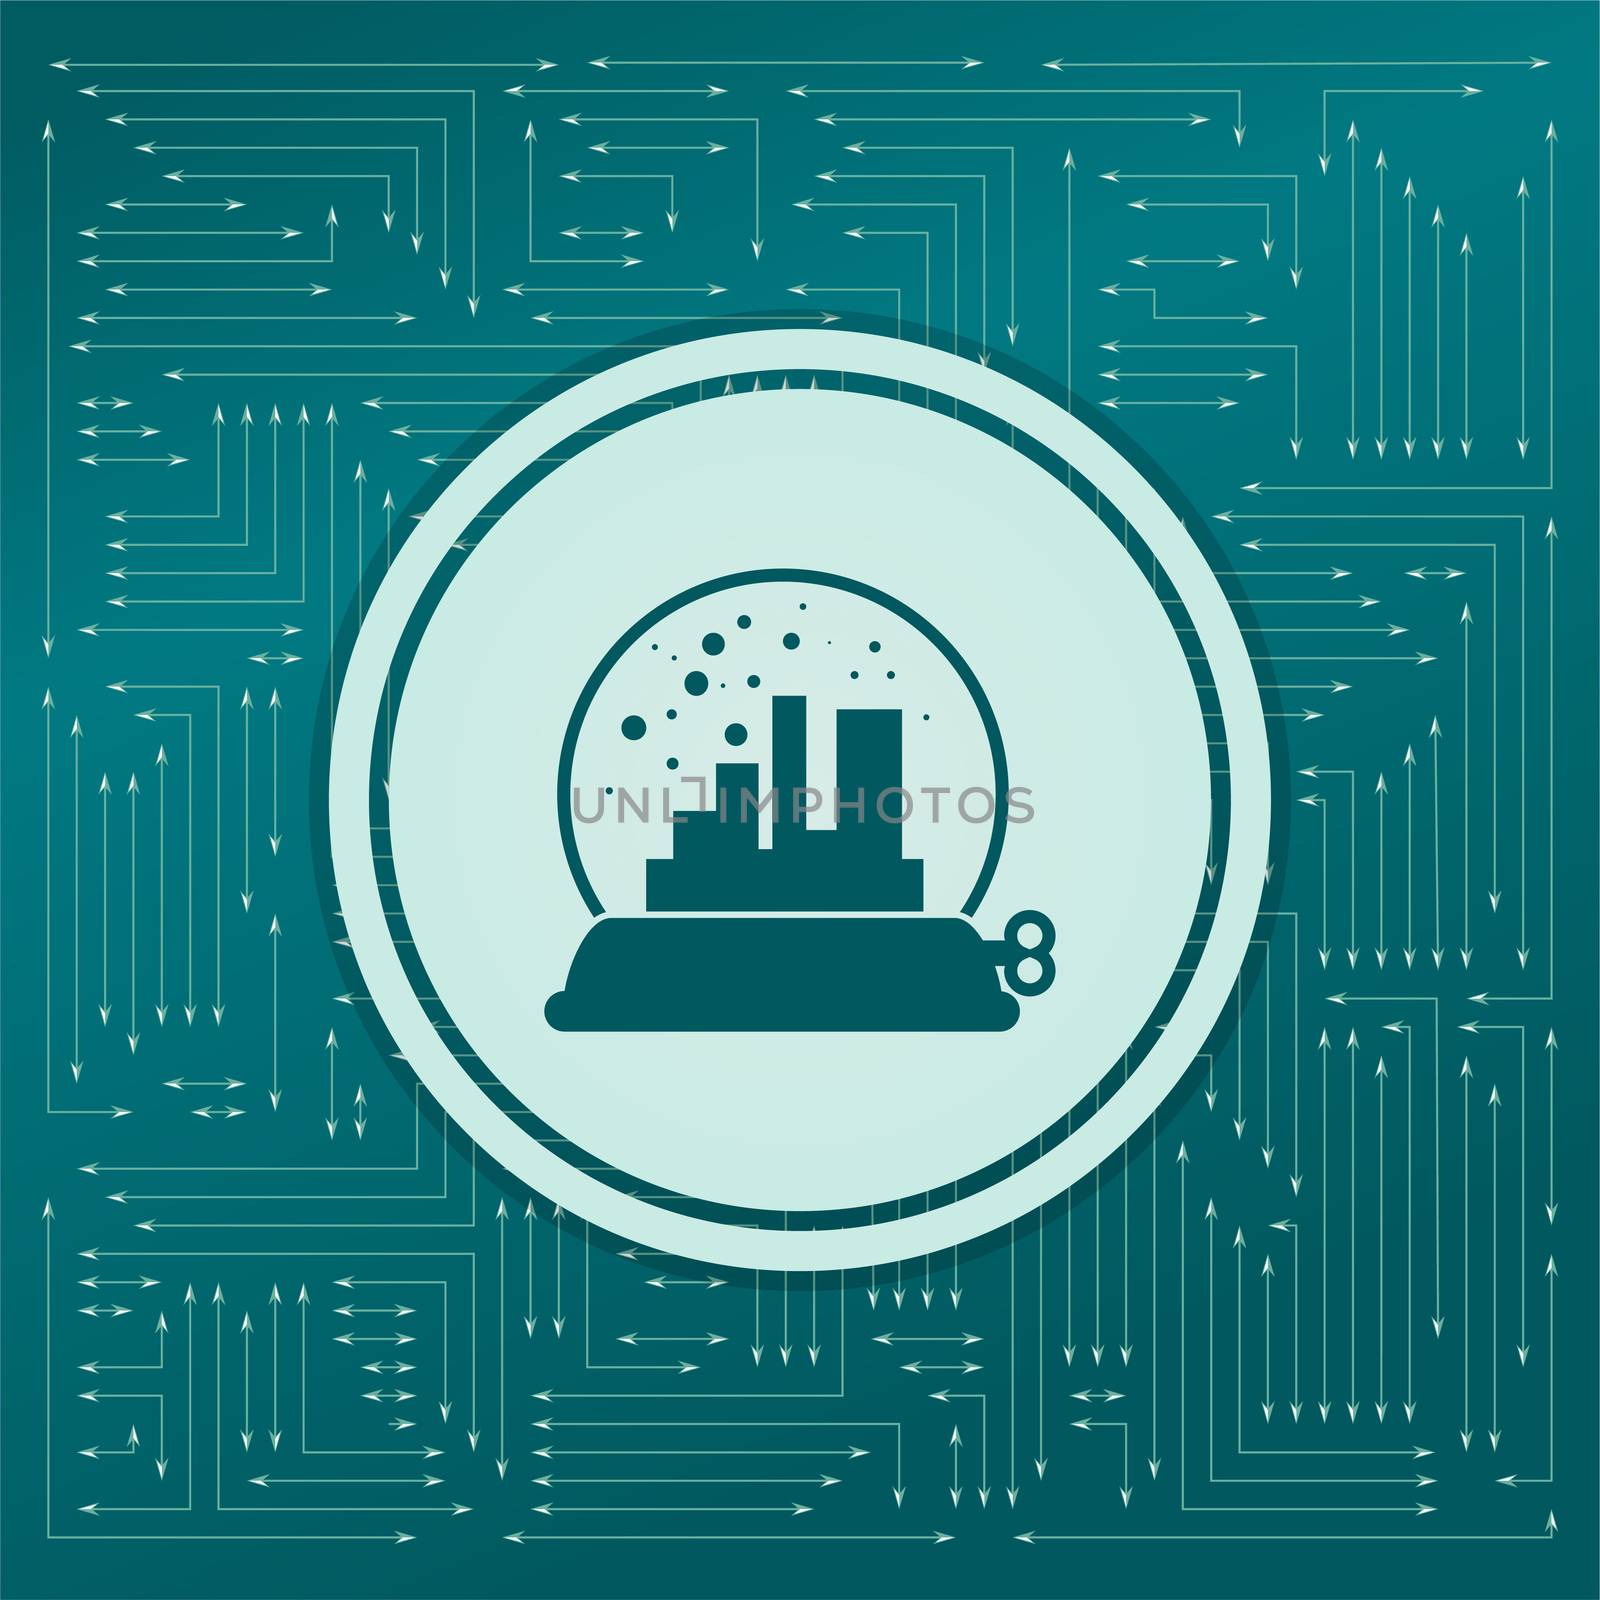 factory icon on a green background, with arrows in different directions. It appears on the electronic board. illustration